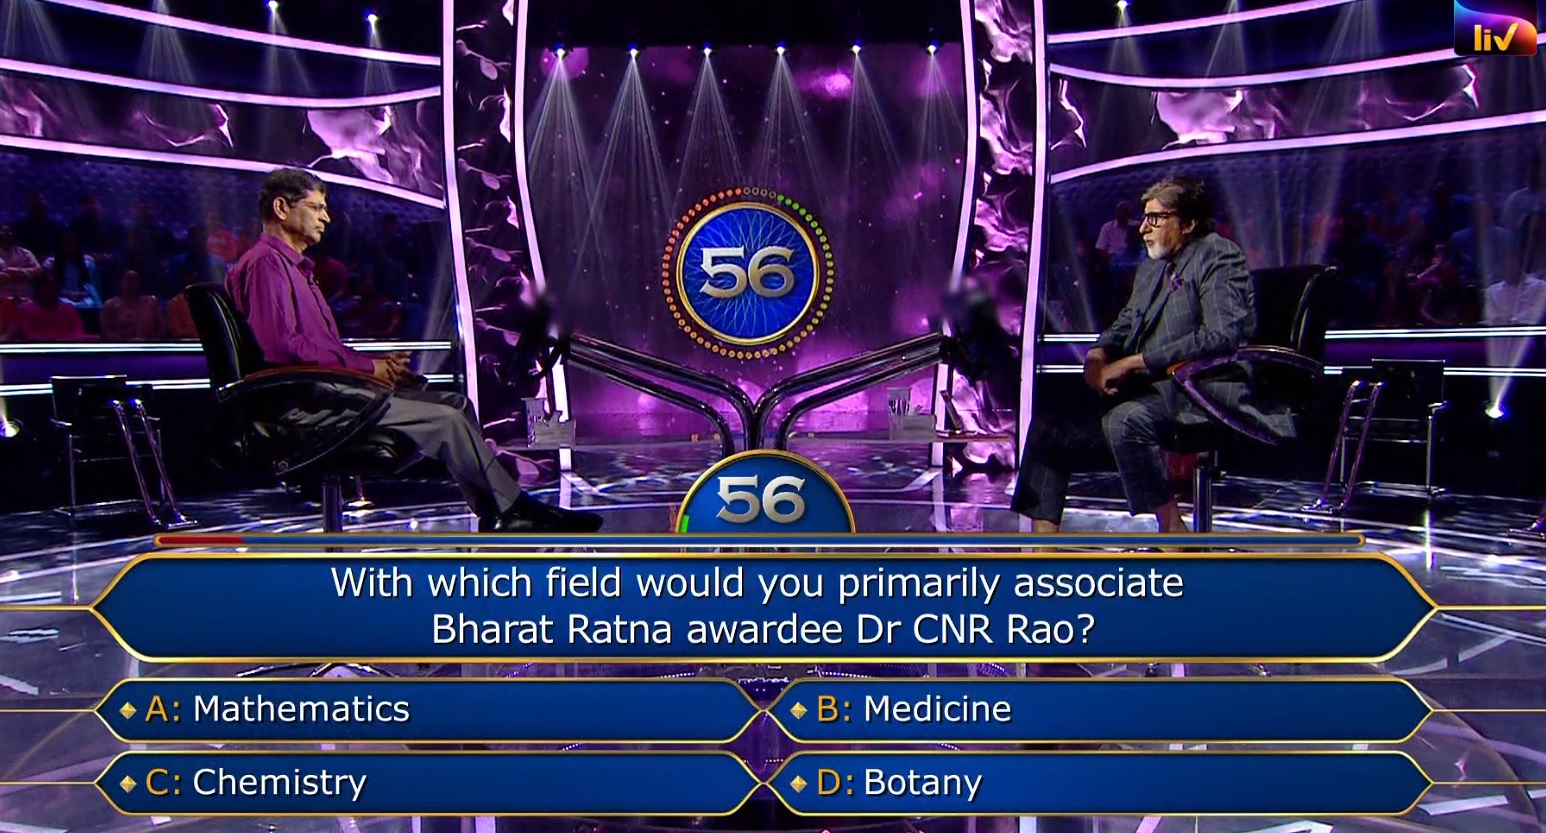 Ques : With which field would you primarily associate Bharat Ratna awardee Dr CNR Rao?